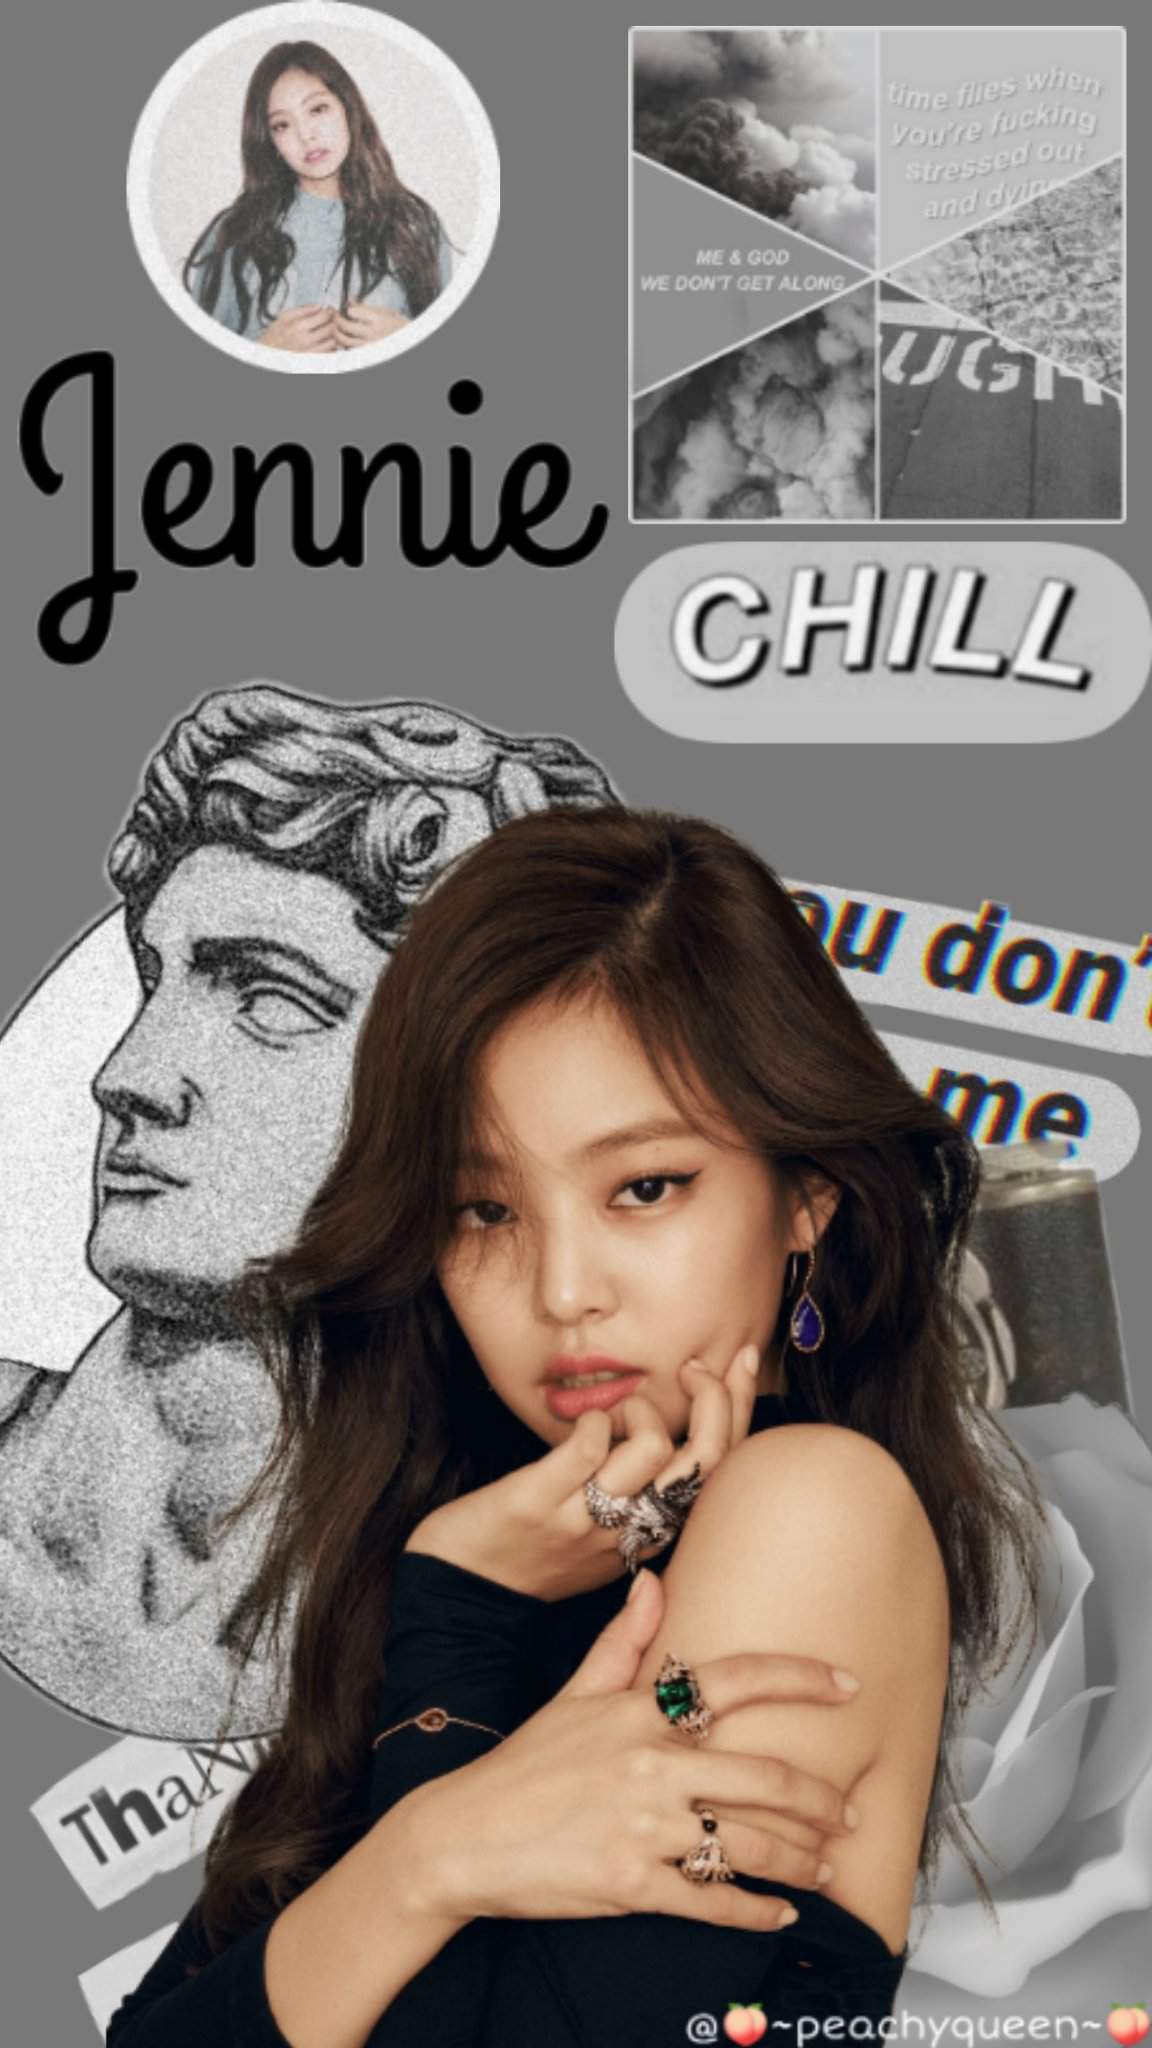 15 Perfect jennie desktop wallpaper aesthetic You Can Save It free ...